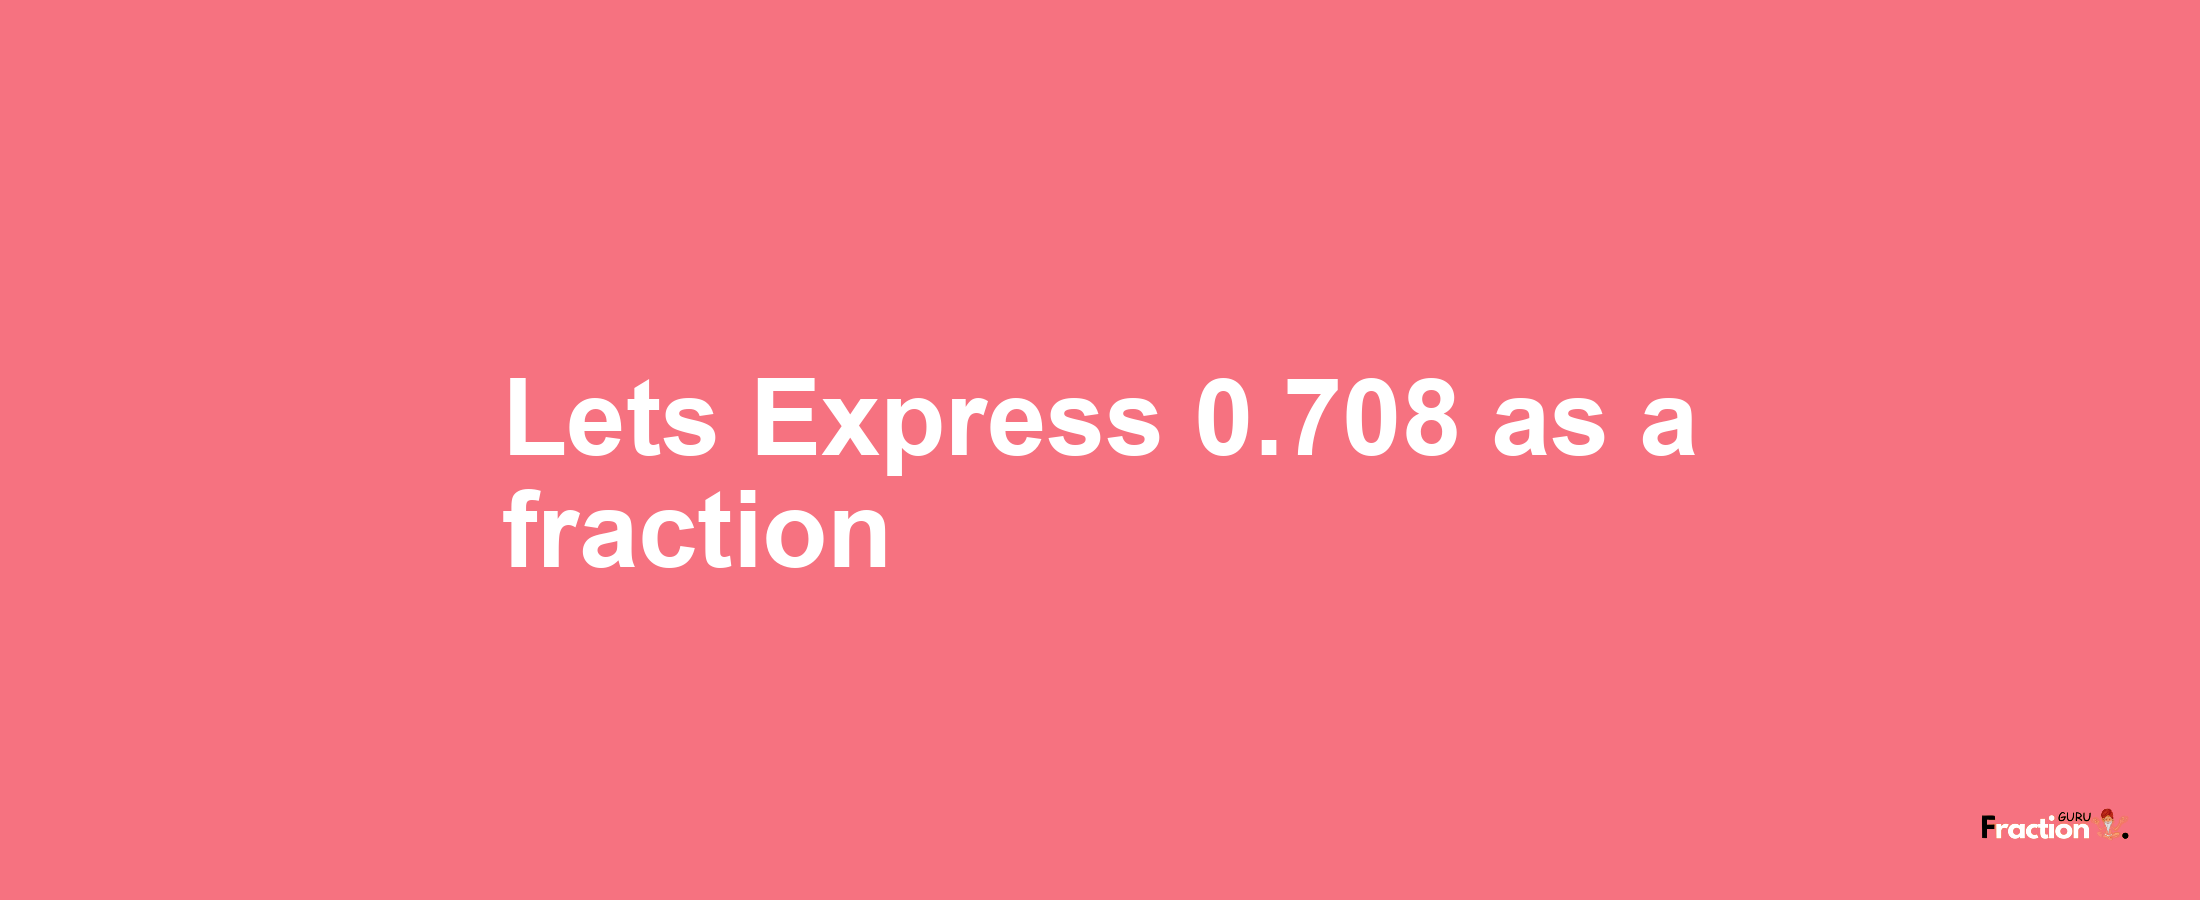 Lets Express 0.708 as afraction